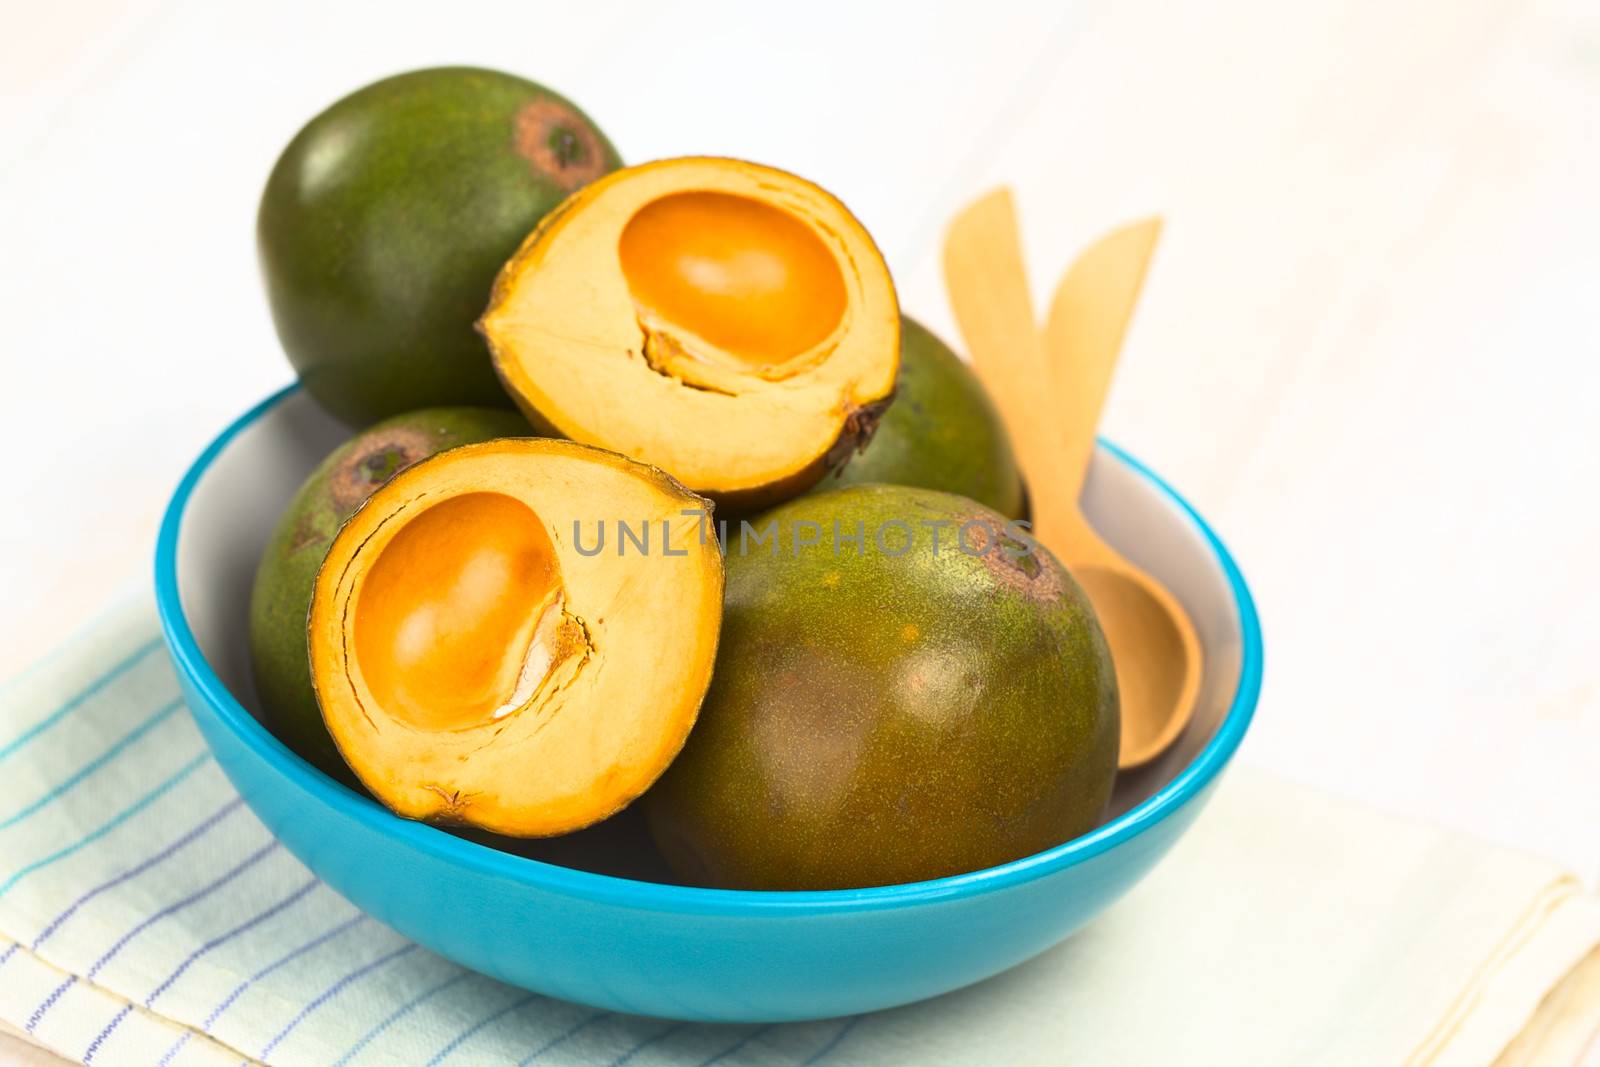 Peruvian fruit called Lucuma (lat. Pouteria lucuma), which has a dry, sweet flesh, and is mostly used to prepare juices, milkshakes, yogurts, ice cream and other desserts, served in a blue bowl (Selective Focus, Focus on the front of the first fruits) 